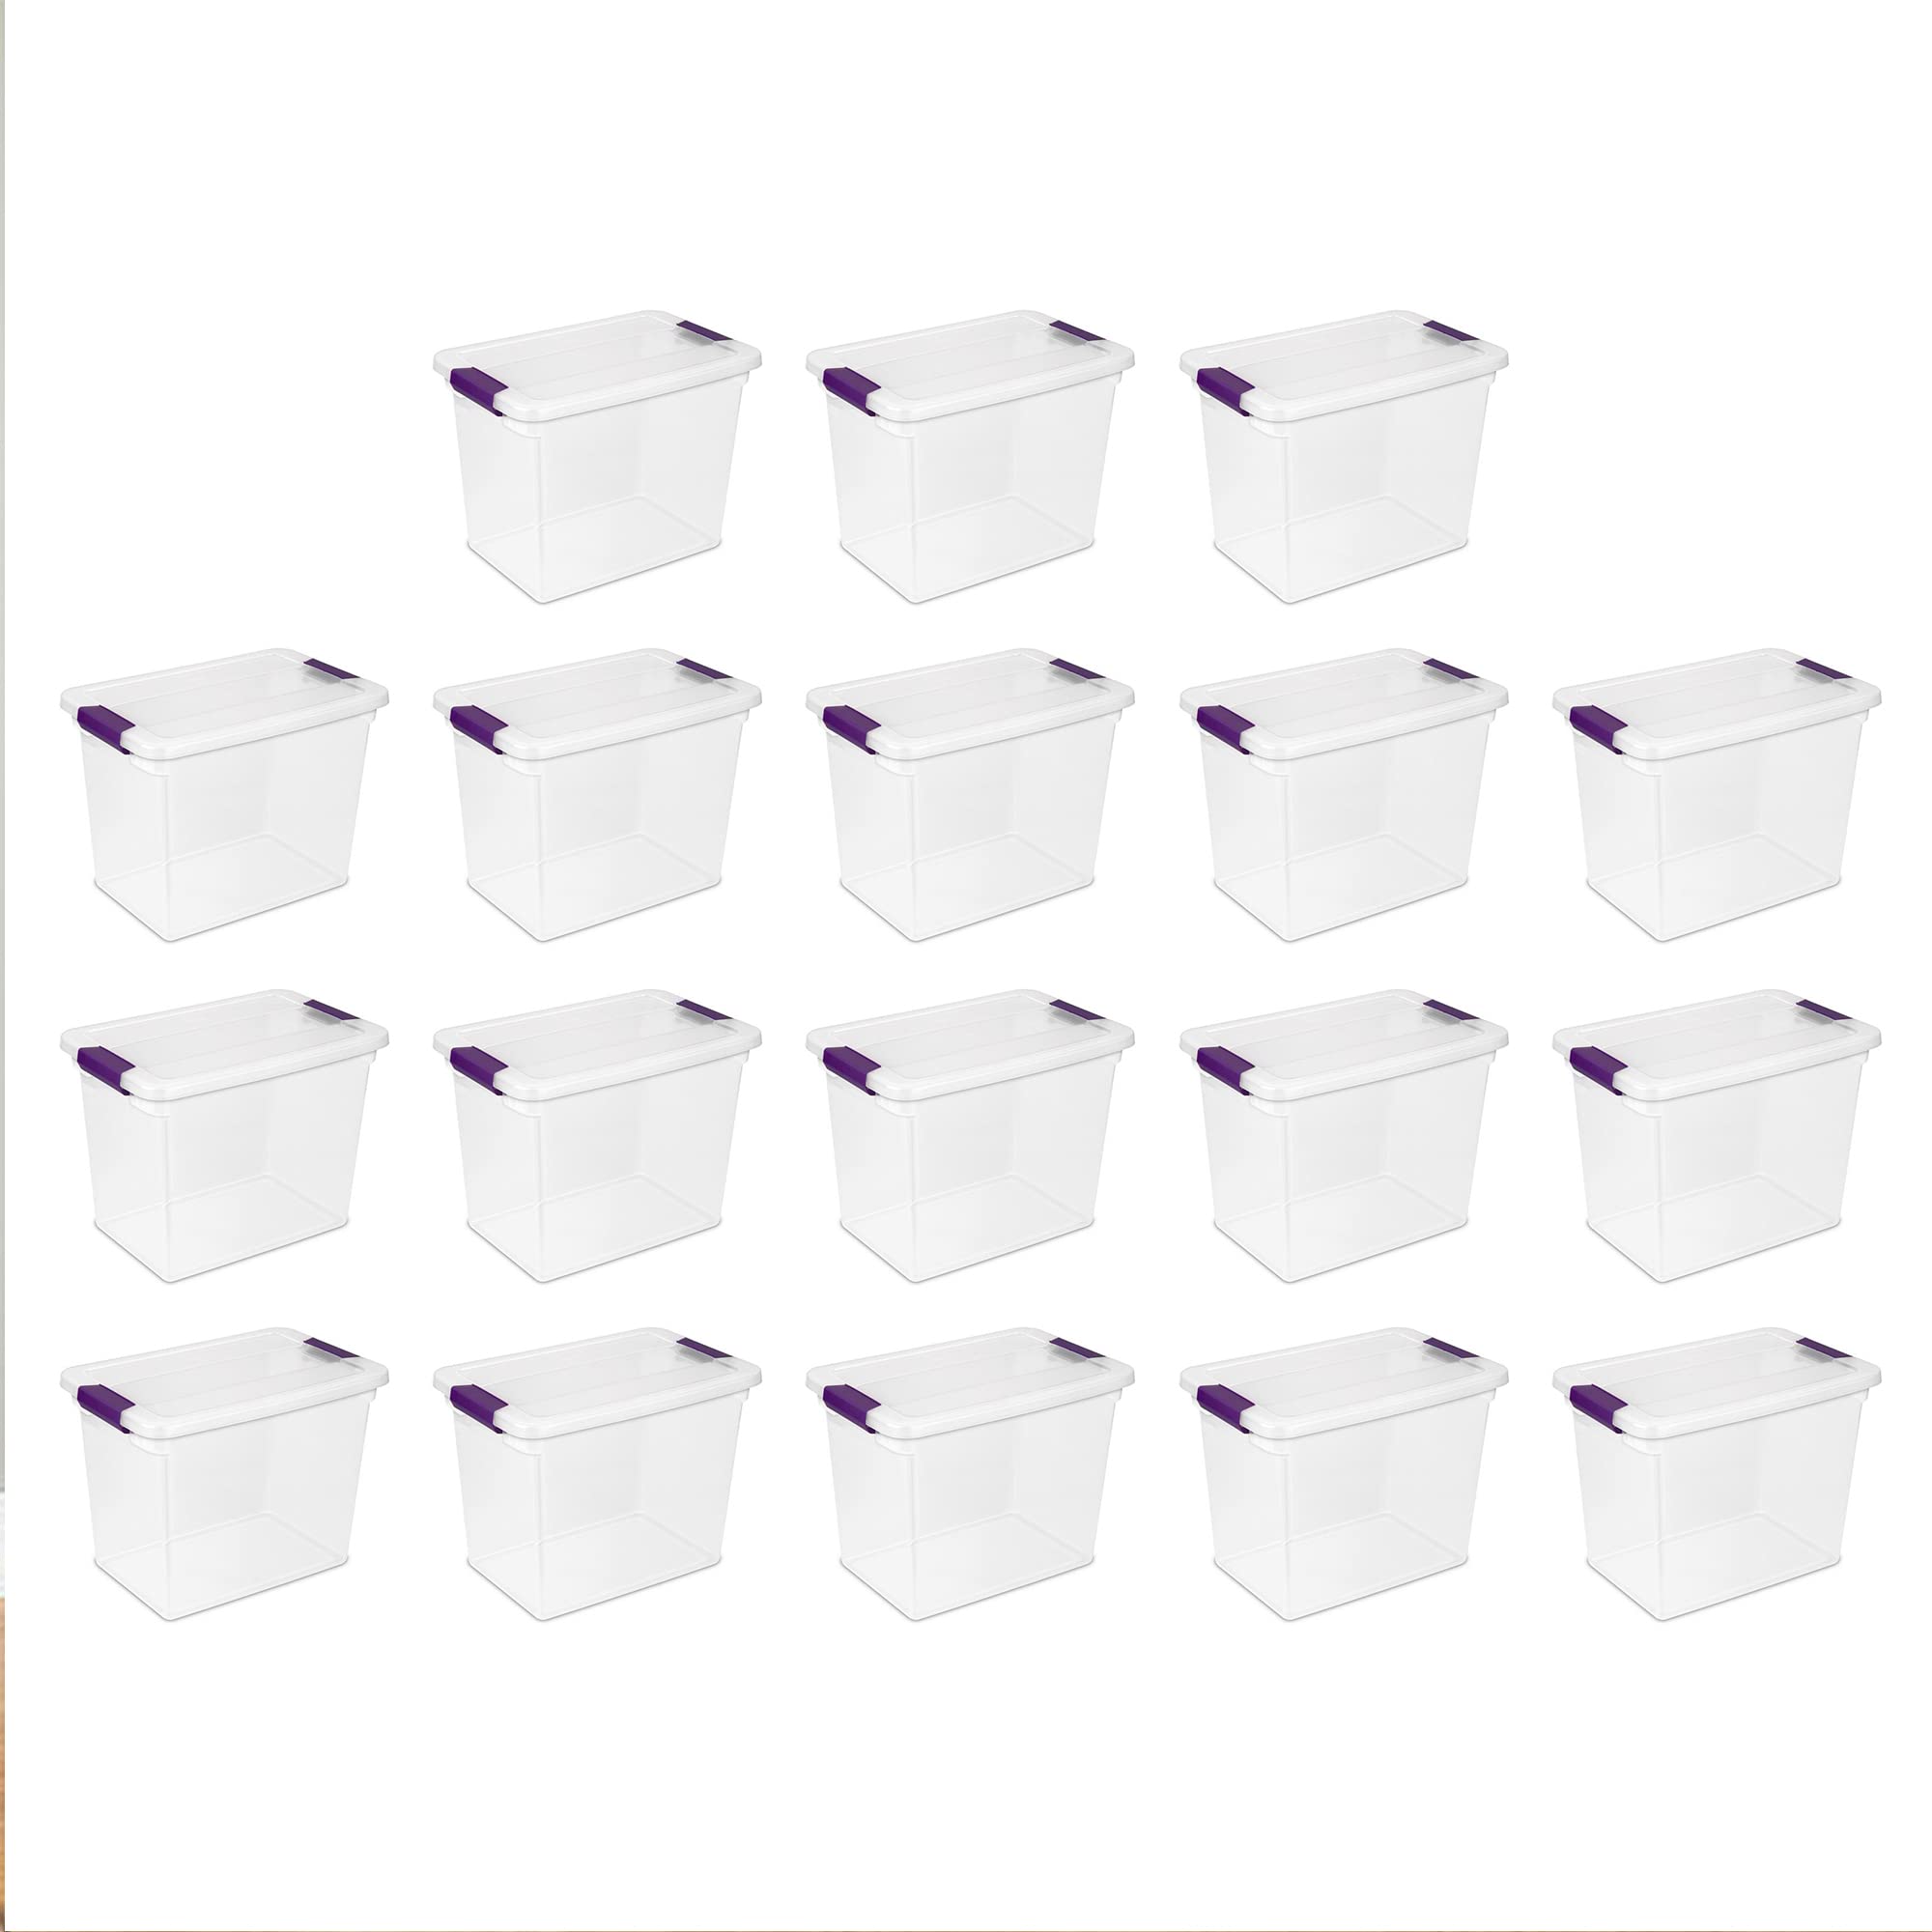 Sterilite 27 Quart ClearView Latch Box, Stackable Storage Bin with Latching Lid, Organize Clothes, Shoes in Closet, Clear Base and Lid, 18-Pack